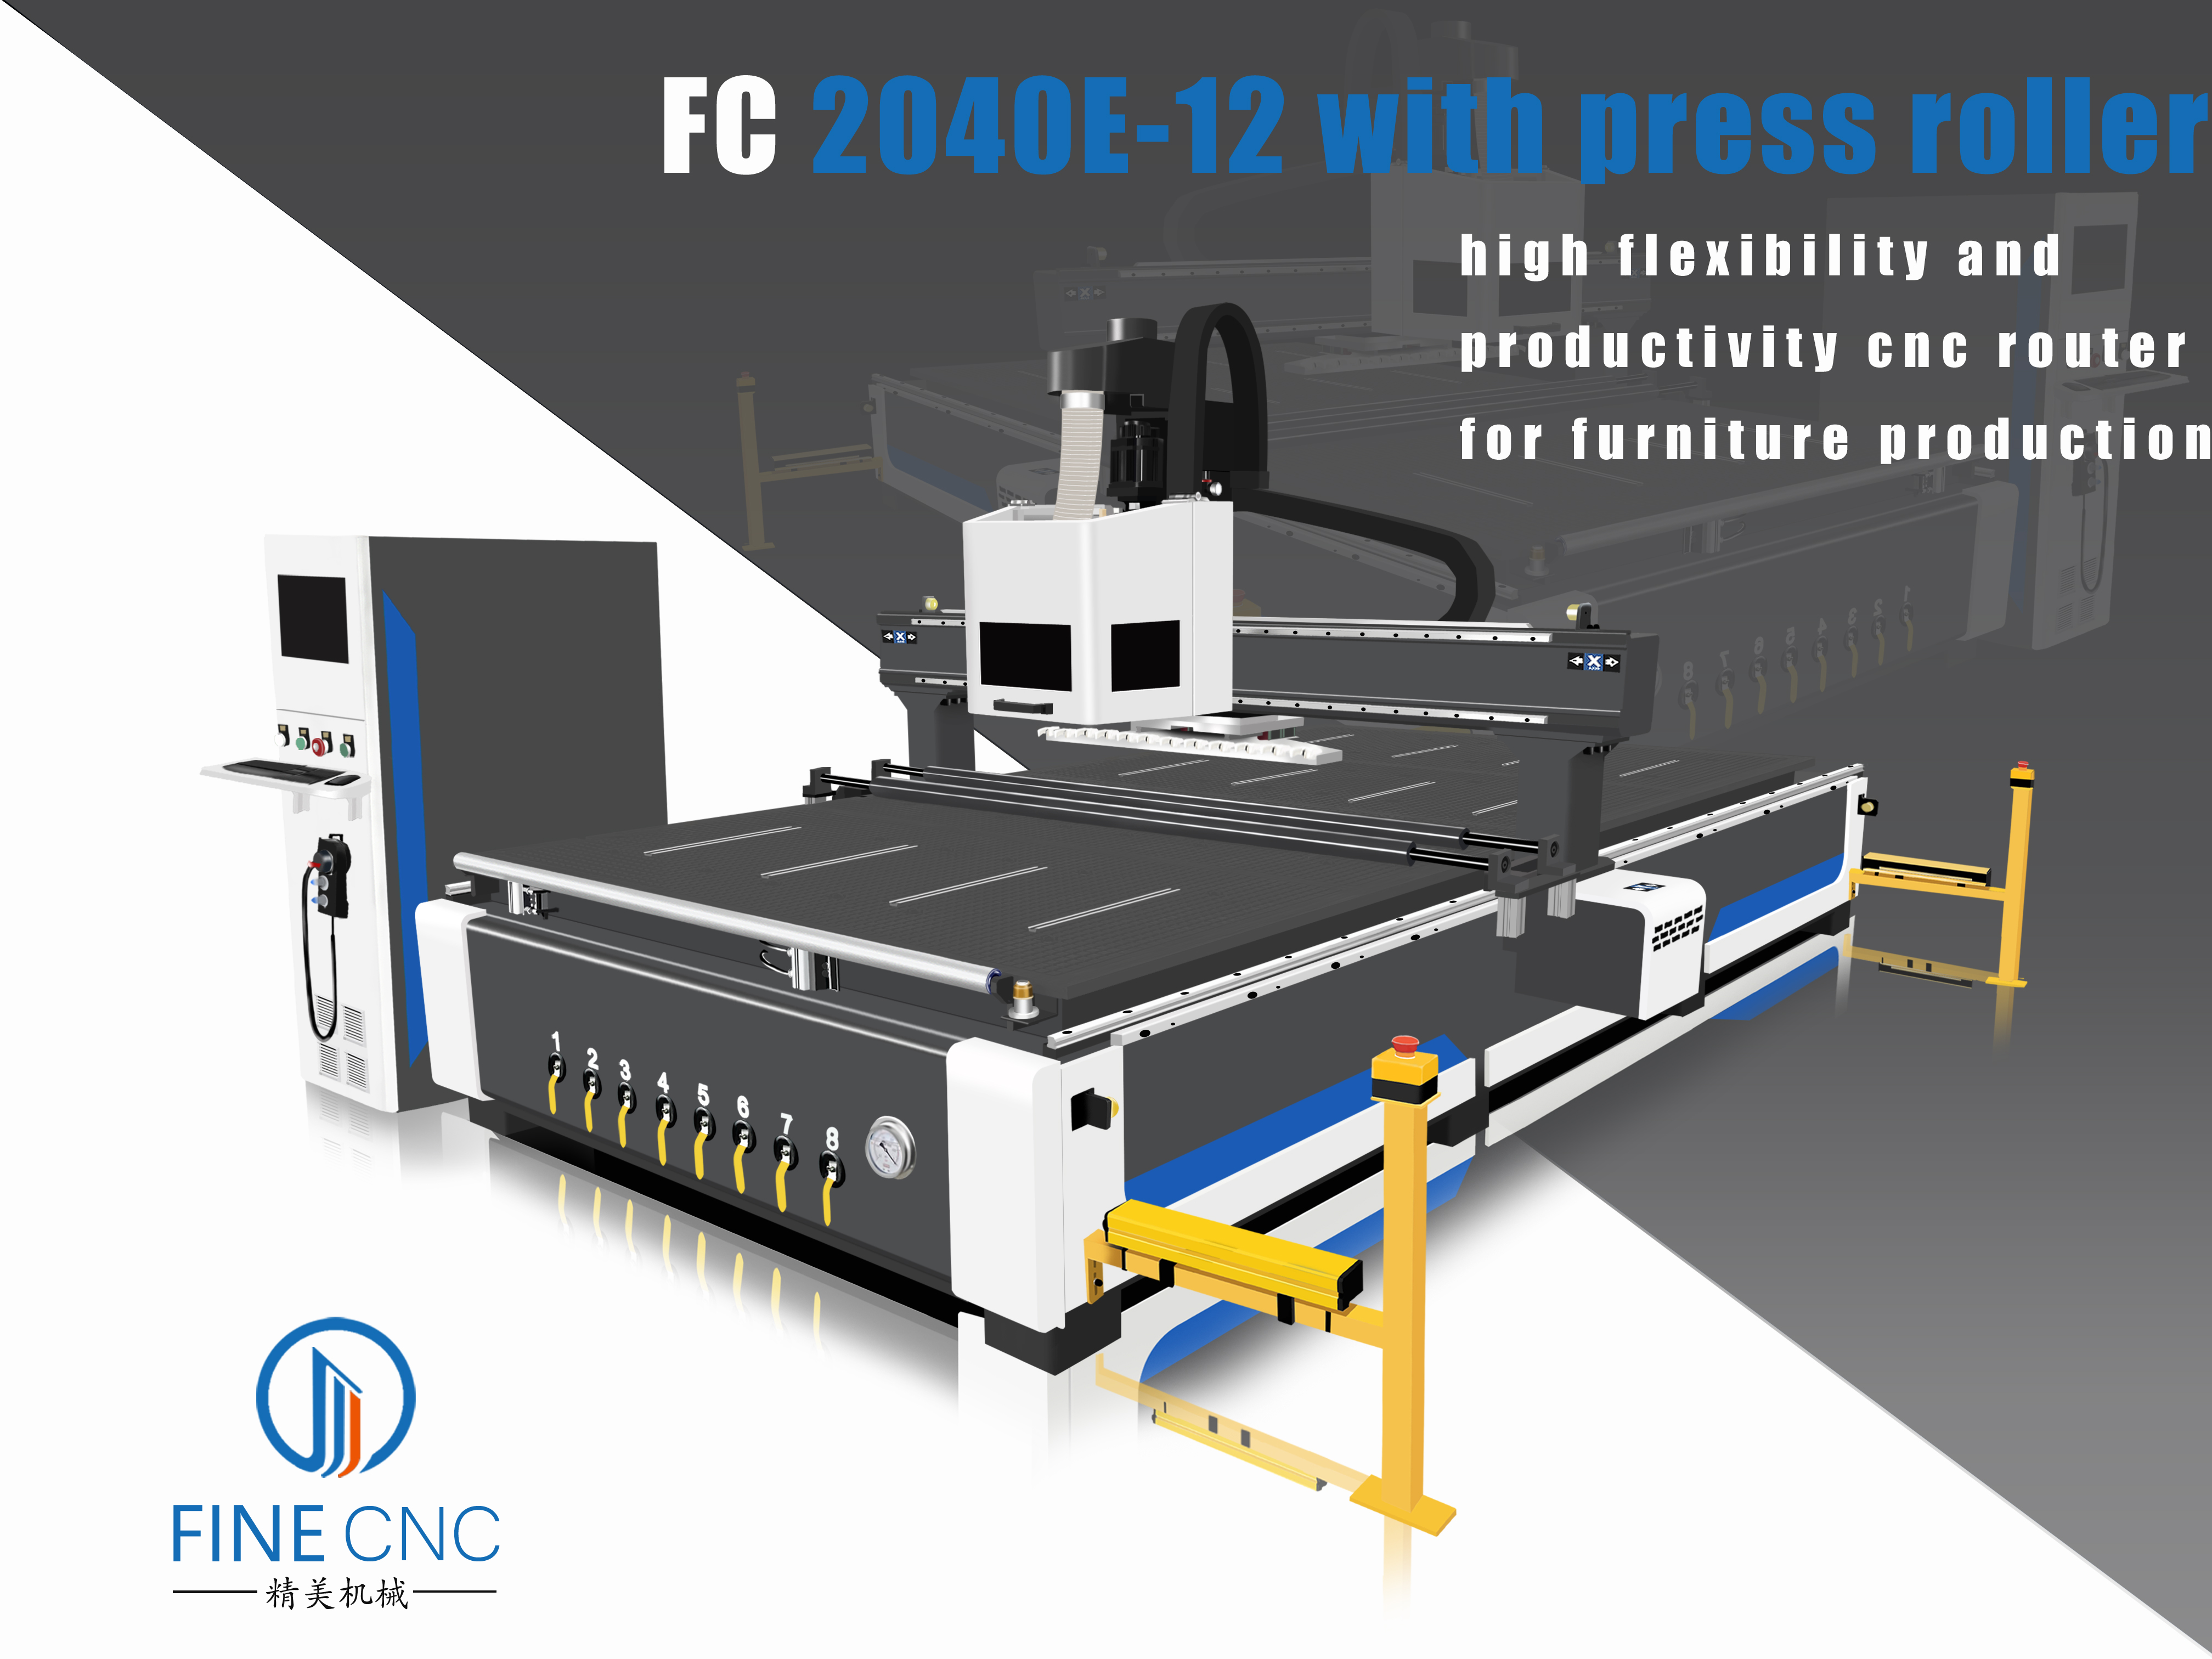 FC2040E-12 ATC CNC Router With Press Roller